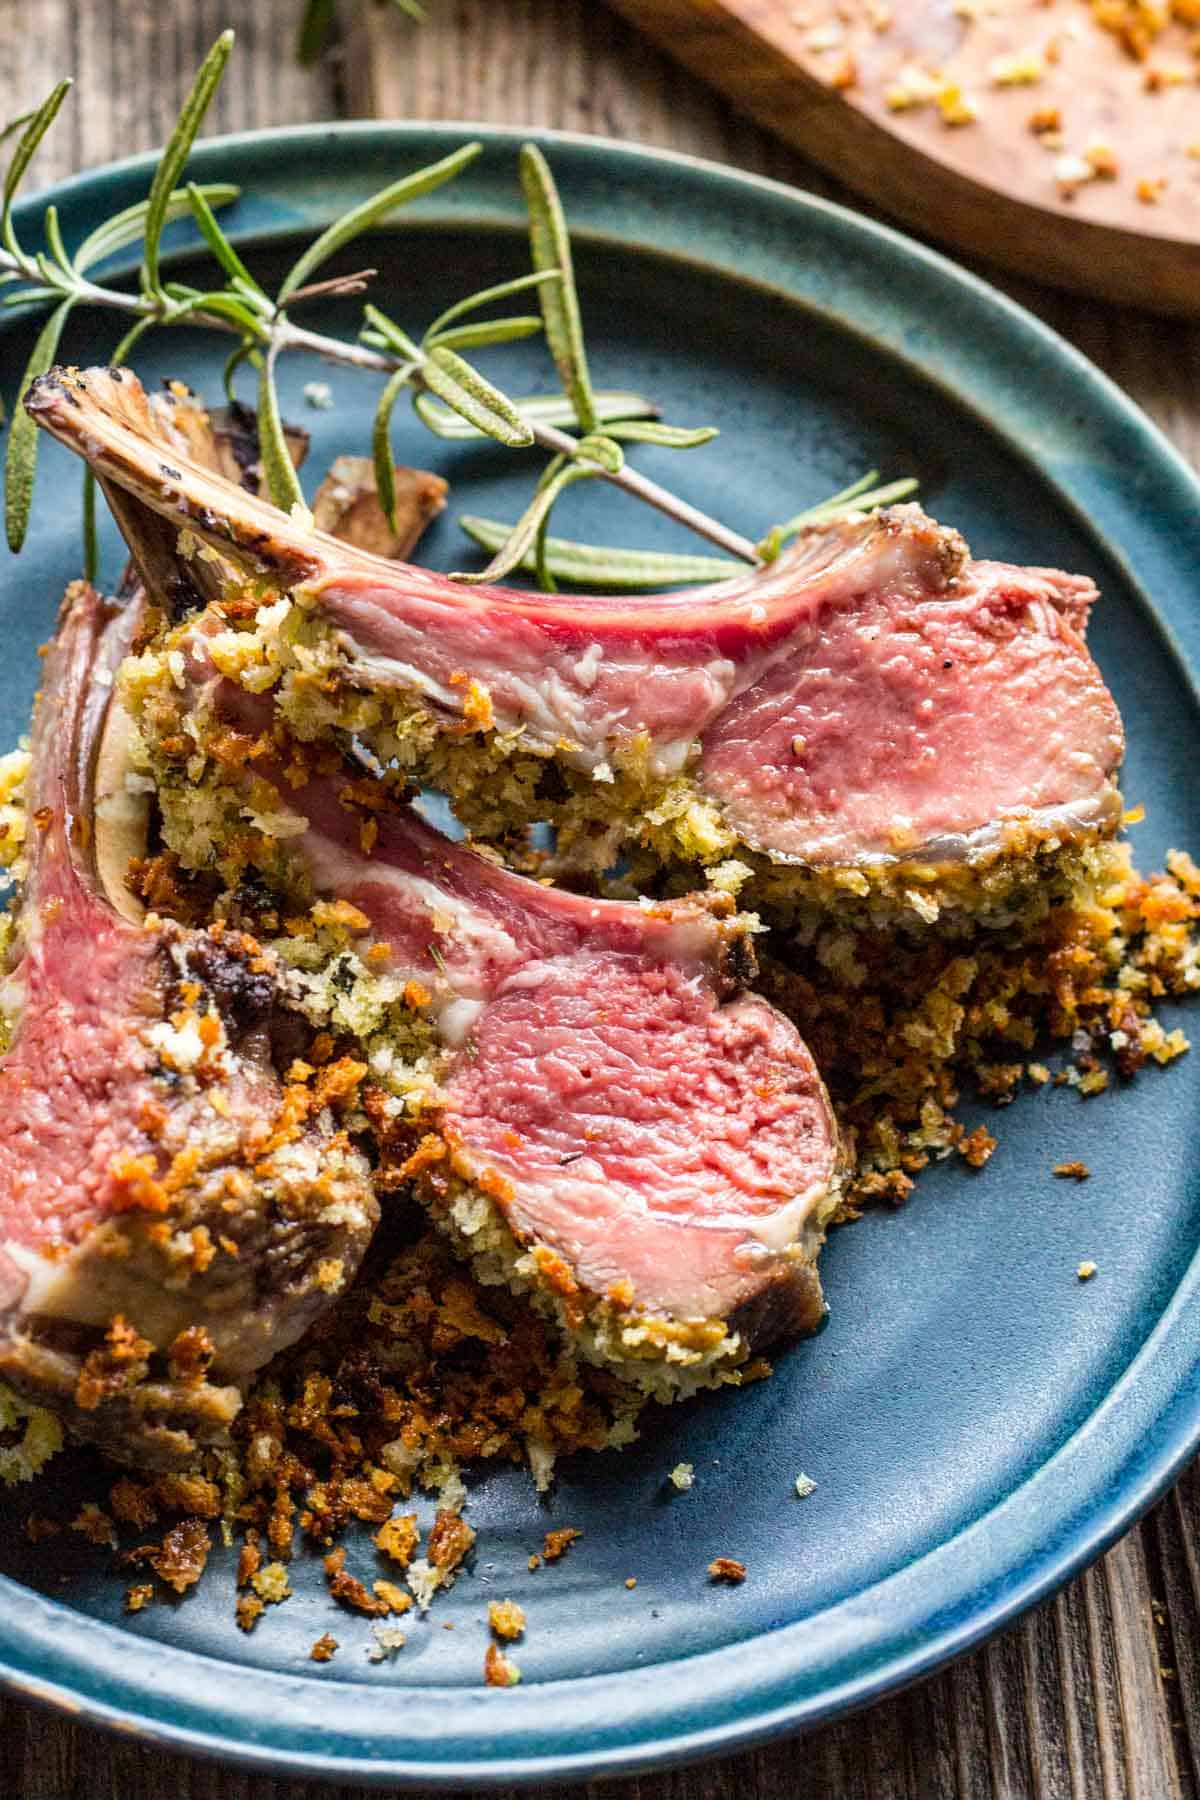 Lamb chops crusted with herbed Dijon cut off a rack and set on a blue dinner plate.